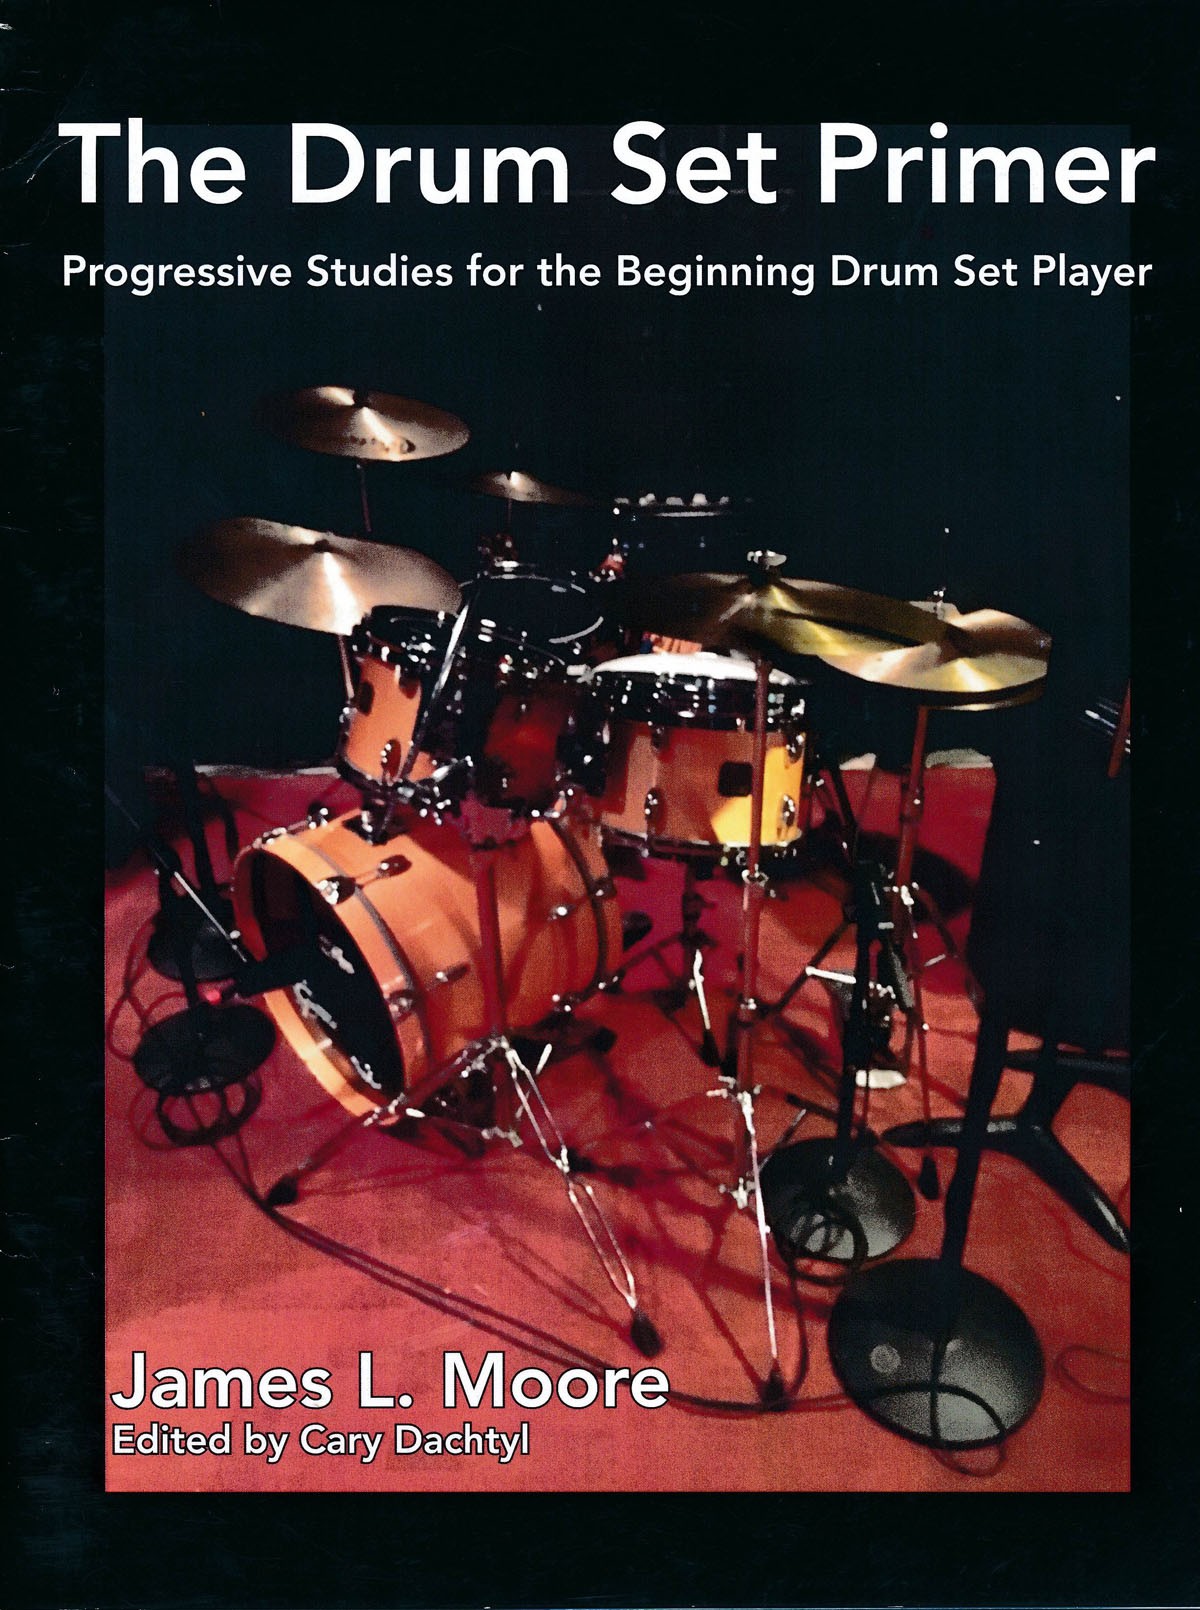 The Drum Set Primer by James Moore